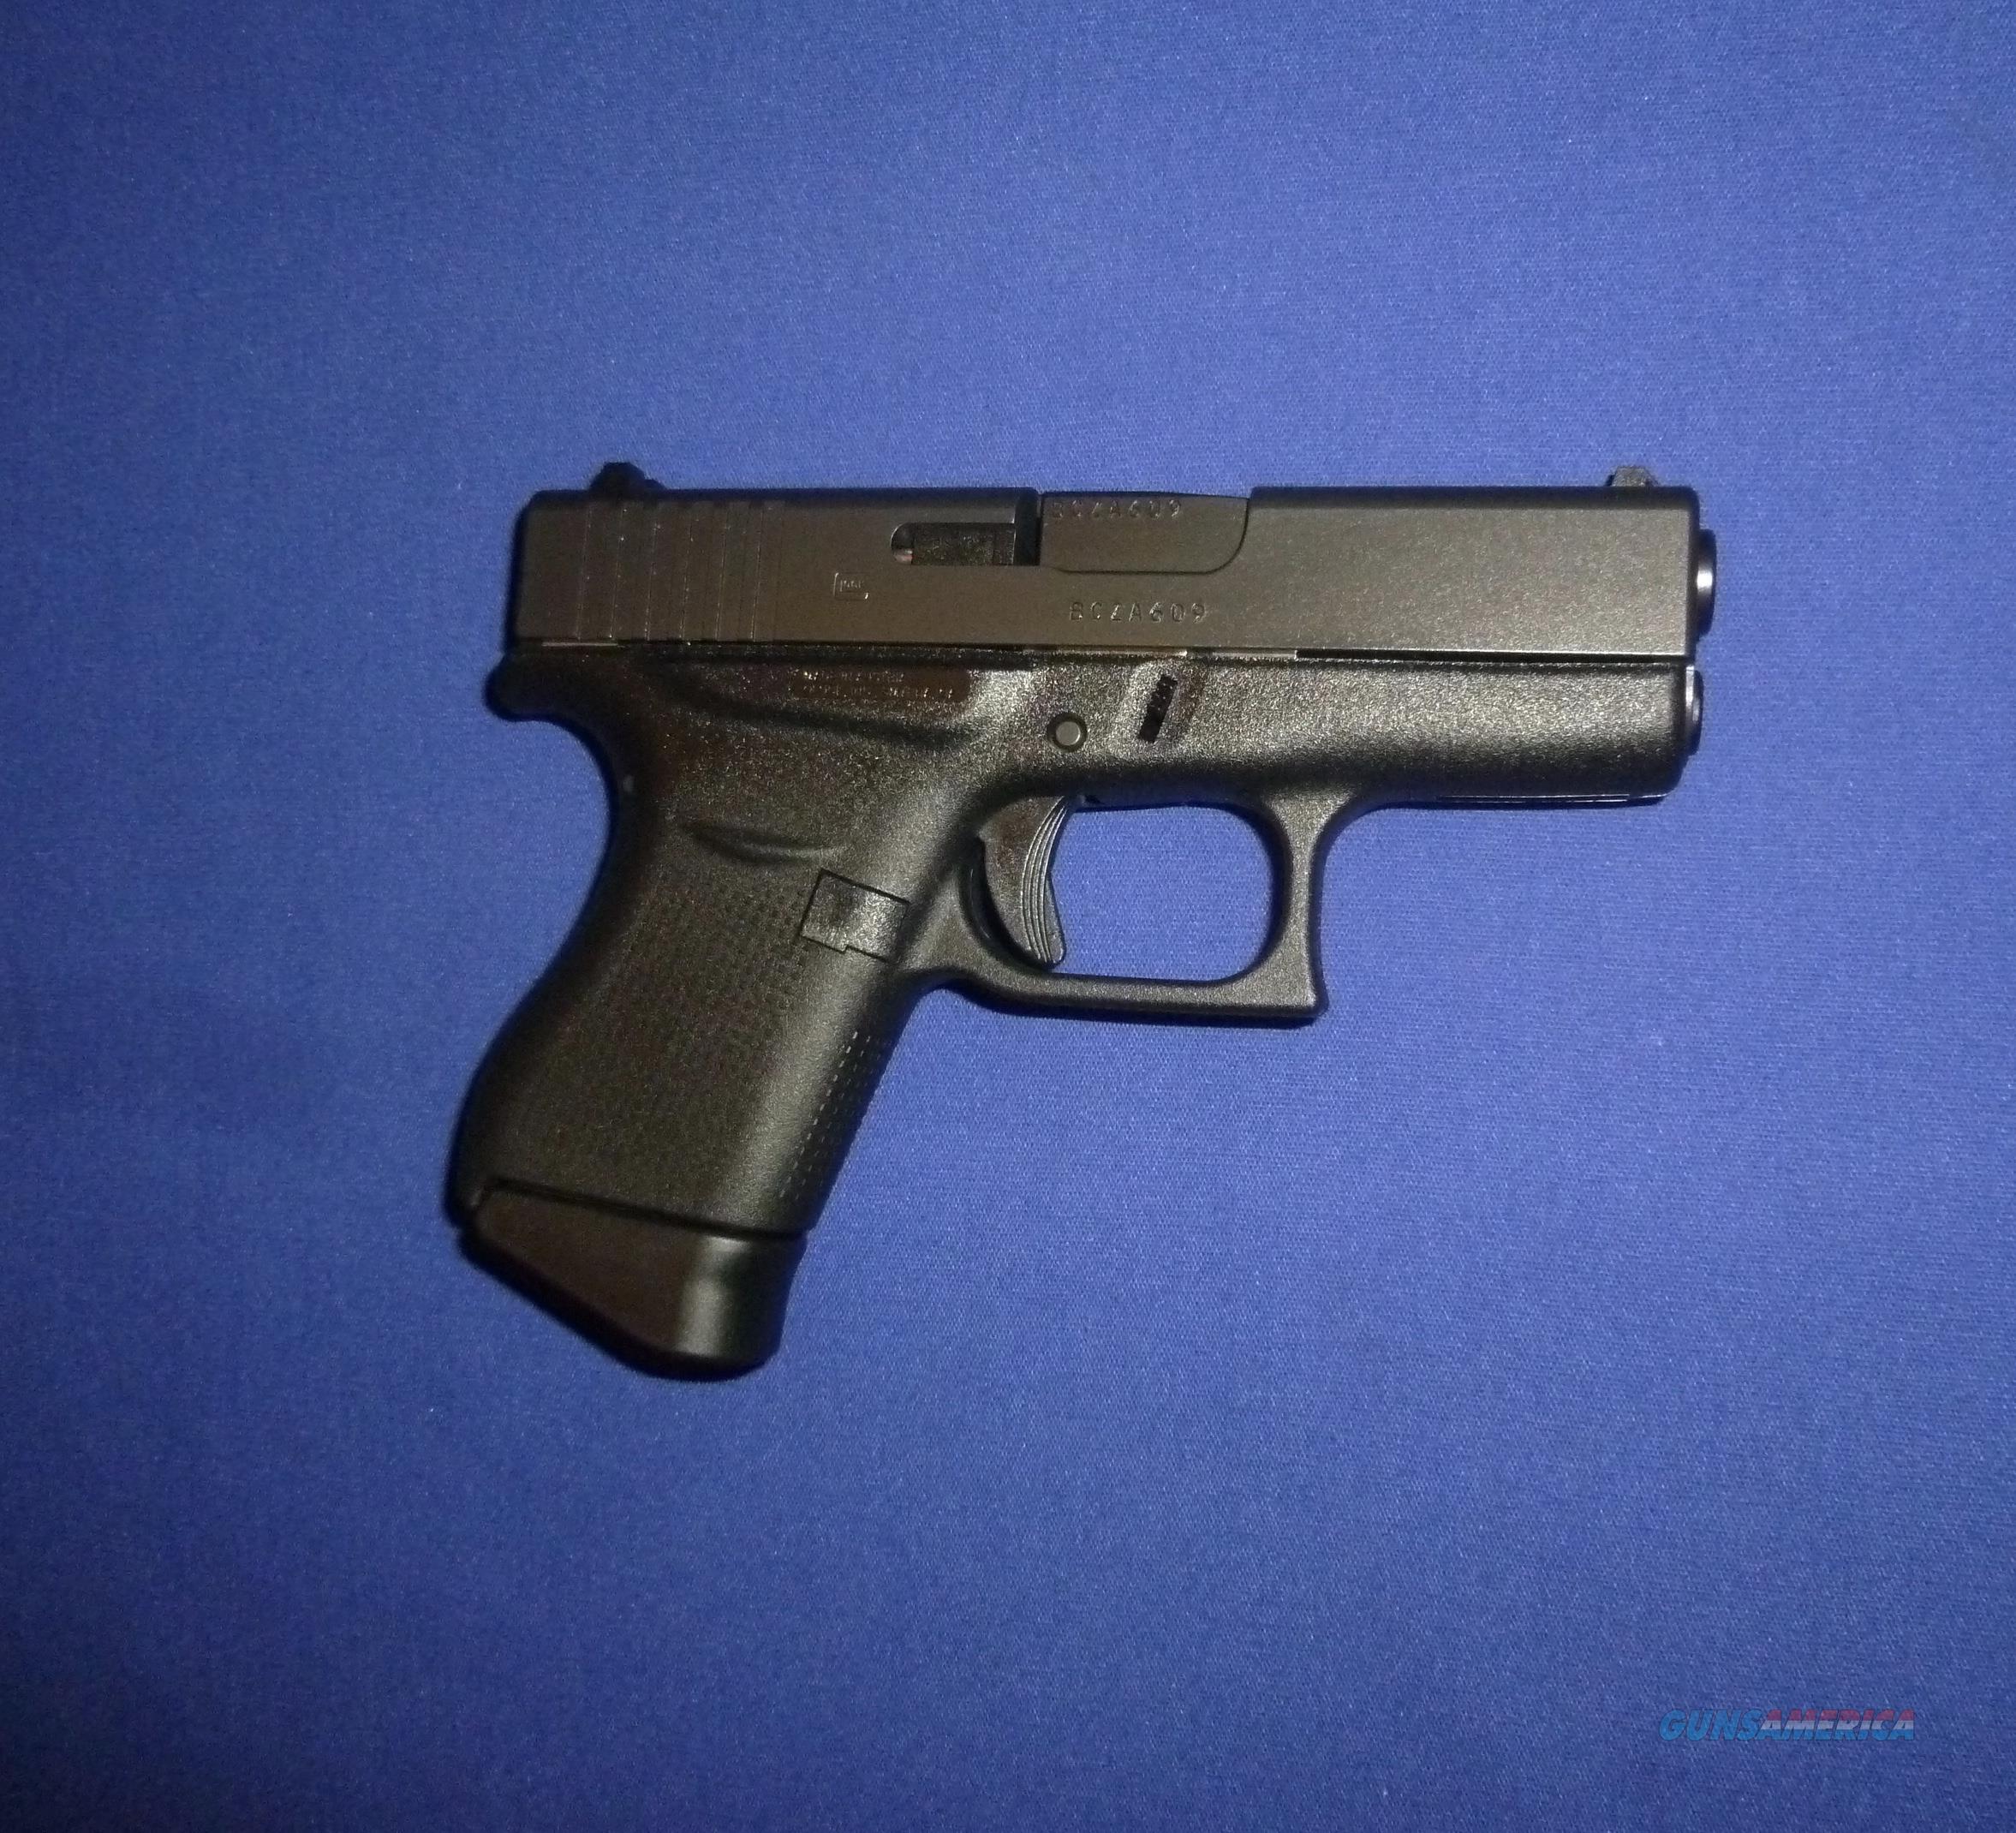 glock compact 9mm double stack